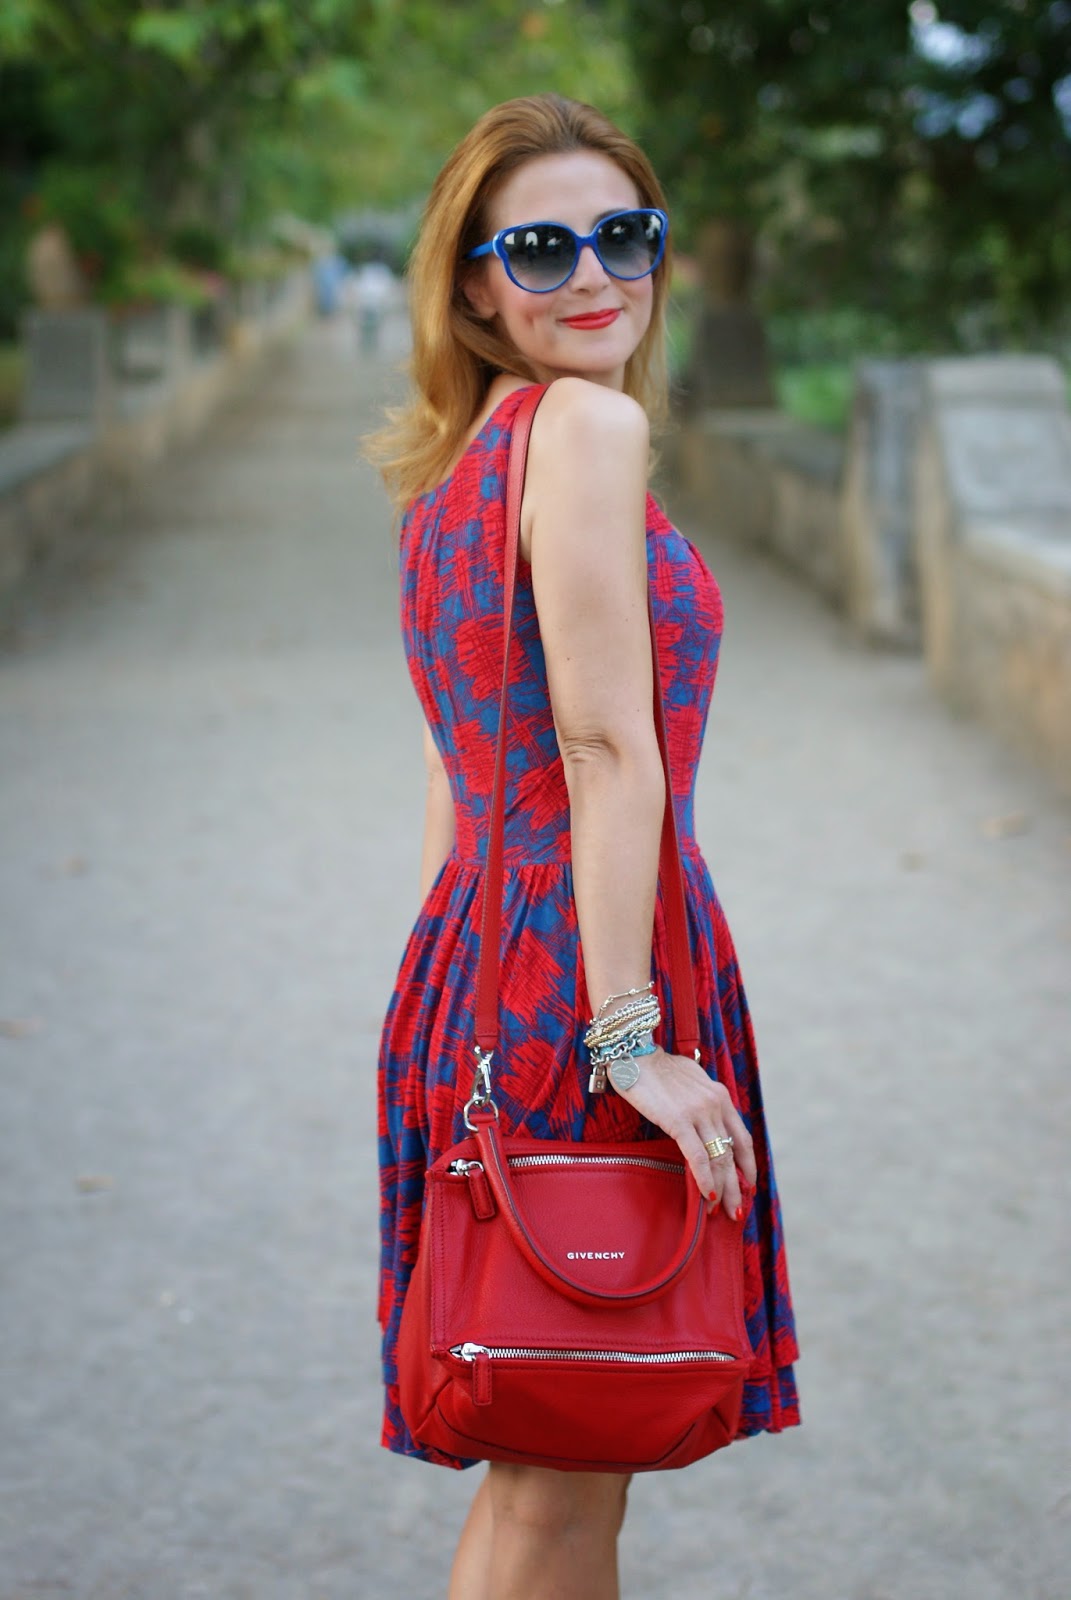 Marc by Marc Jacobs dress, Givenchy Pandora red, Fashion and Cookies, fashion blogger, Villa Cimbrone pics